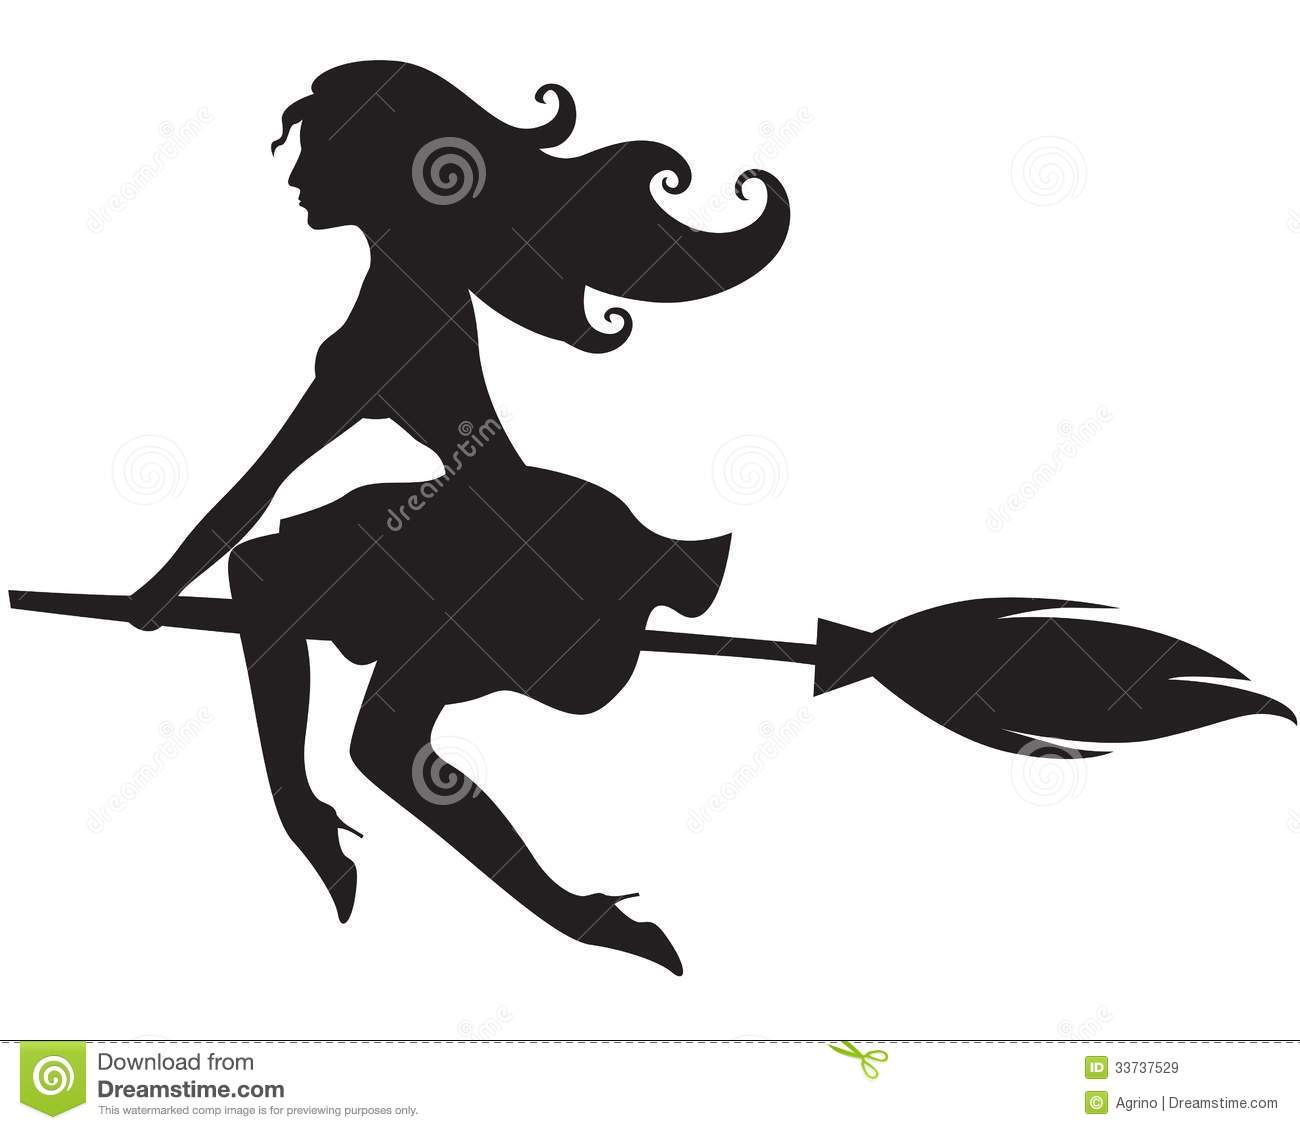 Glamour Witch On A Broomstick Royalty Free Stock Images   Image